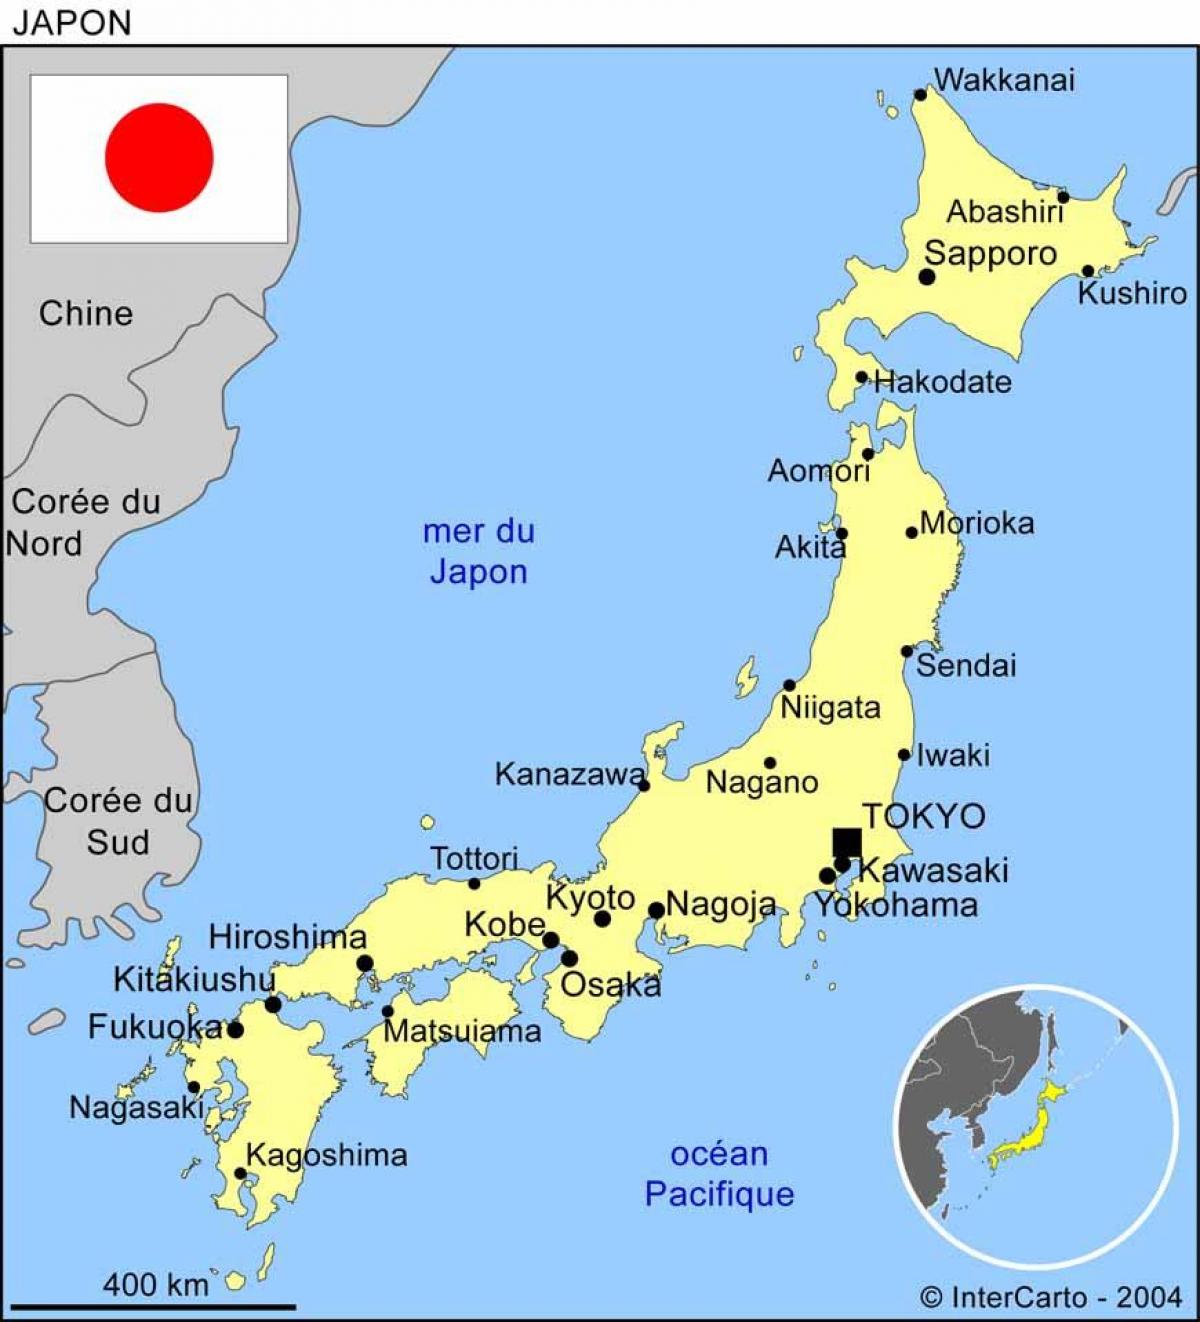 Japan on a map